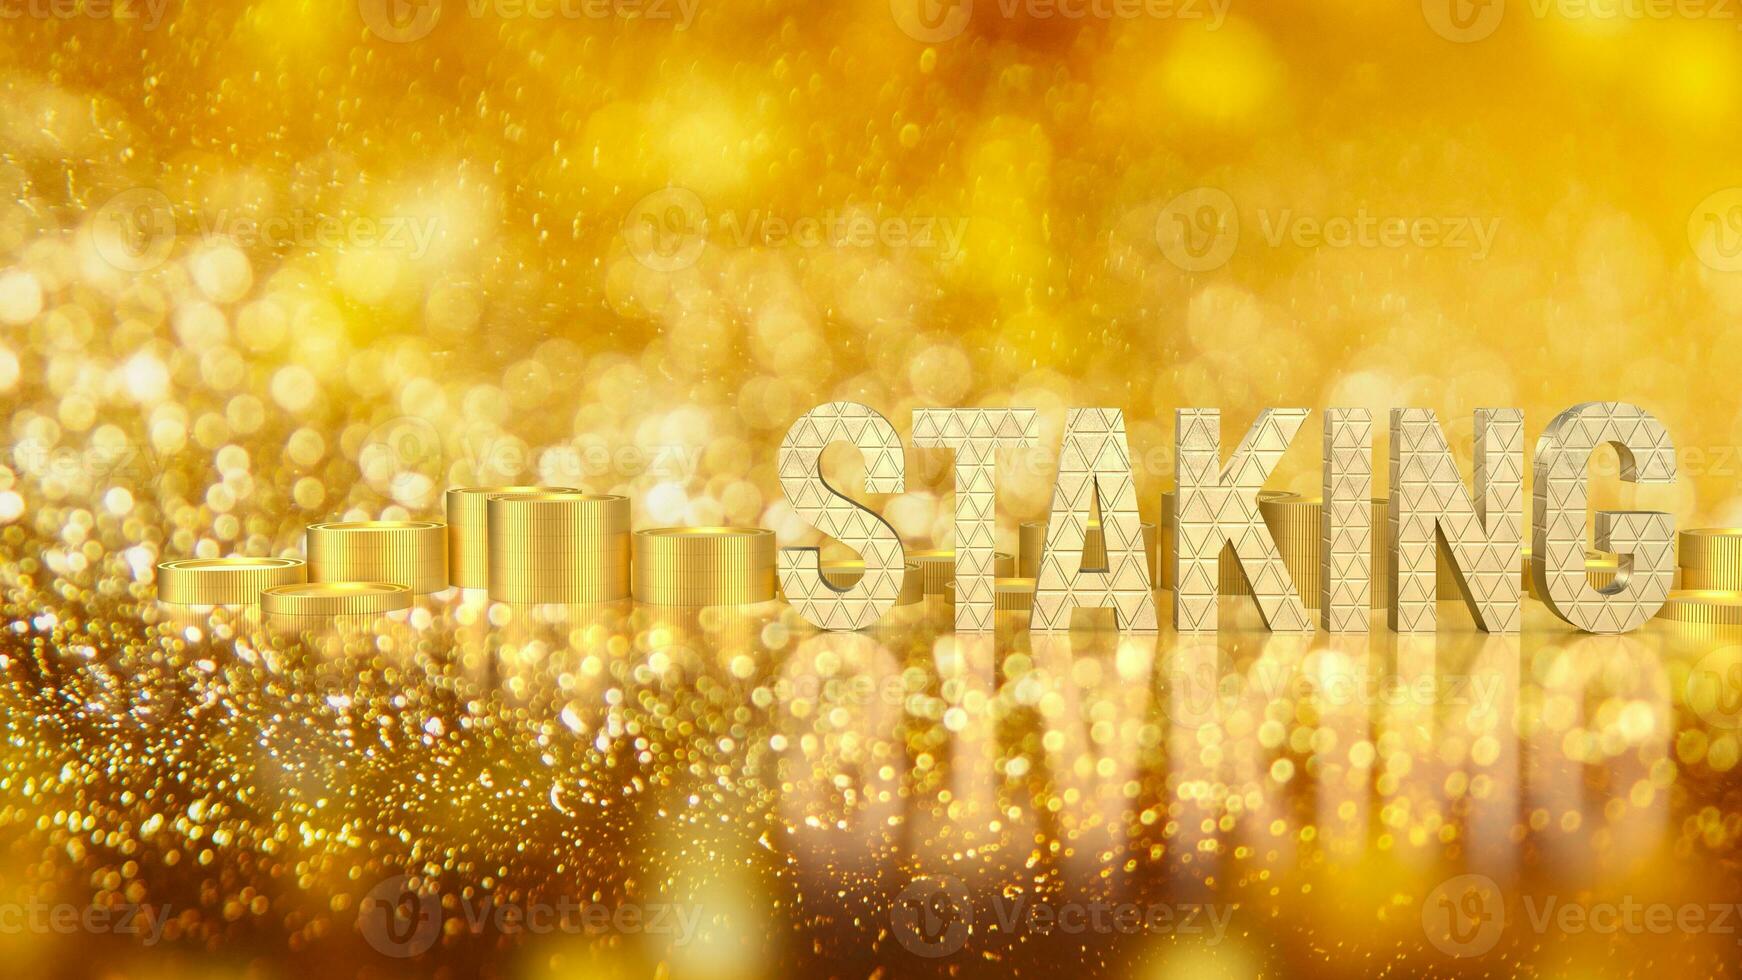 The staking text refers to the process of actively participating in a blockchain network  3d rendering. photo